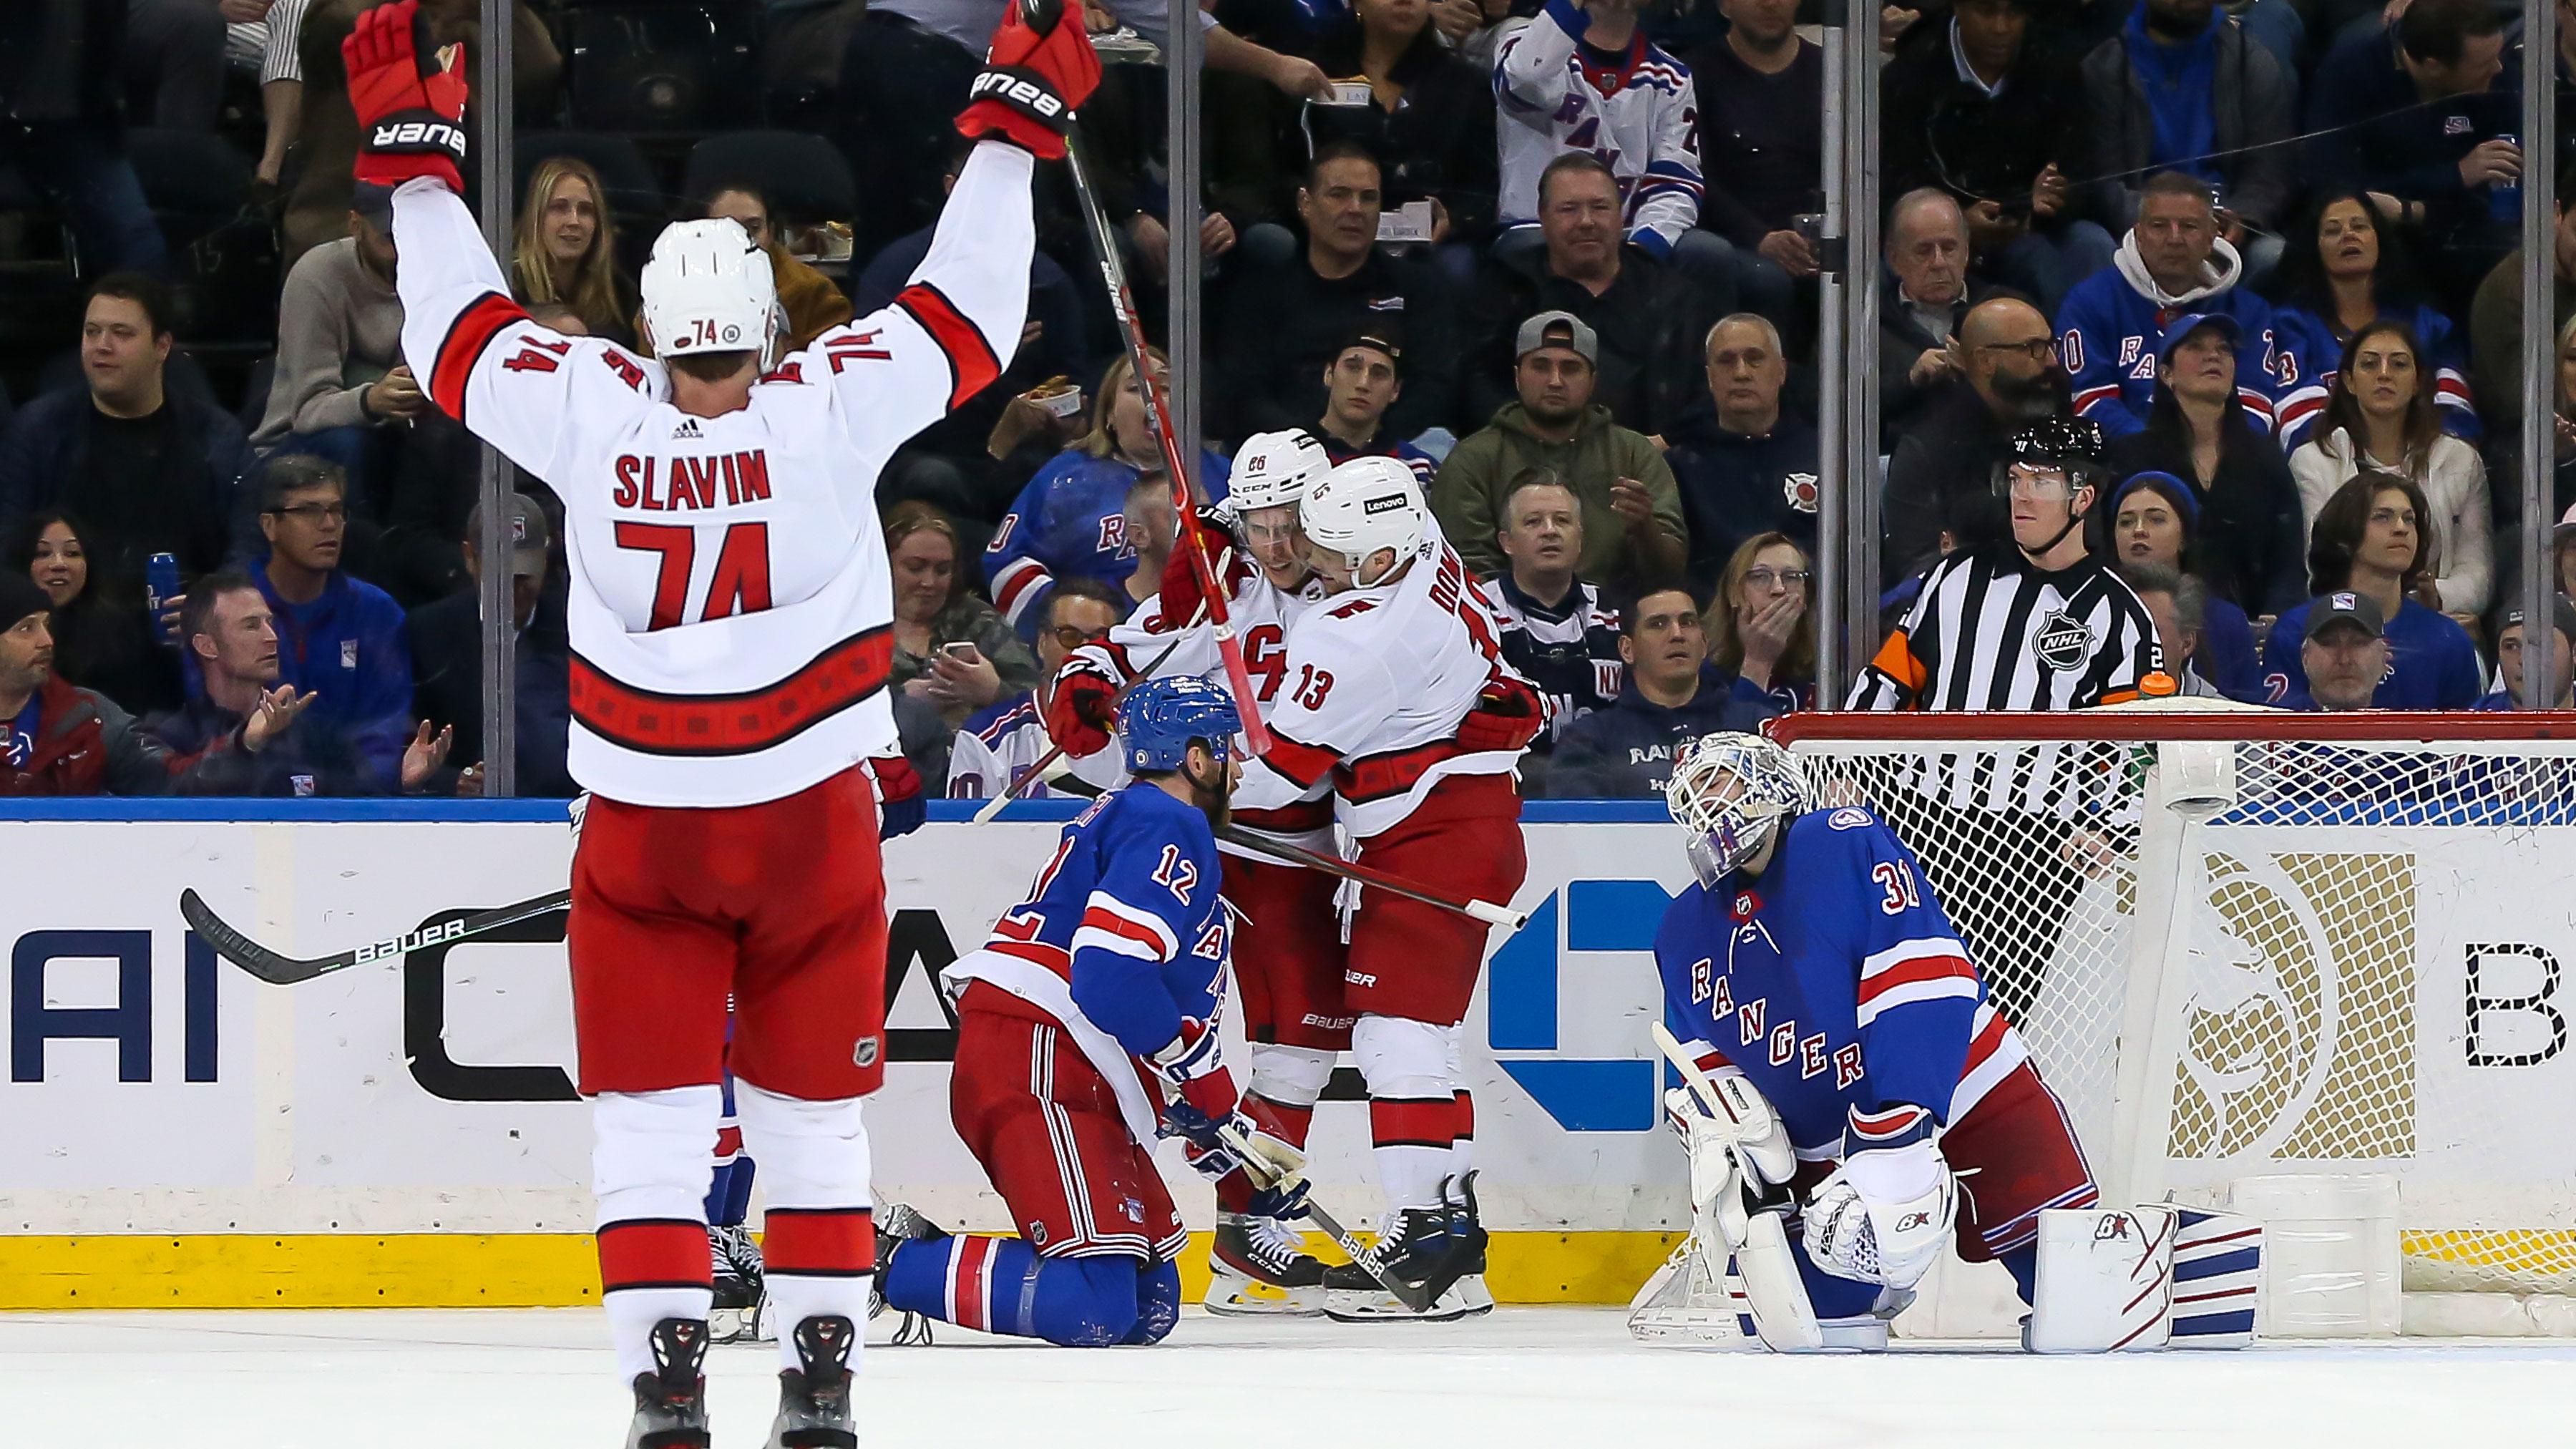 Apr 26, 2022; New York, New York, USA; Carolina Hurricanes left wing Teuvo Teravainen (86) celebrates with Carolina Hurricanes center Max Domi (13) after scoring a goal against New York Rangers during the second period at Madison Square Garden. / Tom Horak-USA TODAY Sports